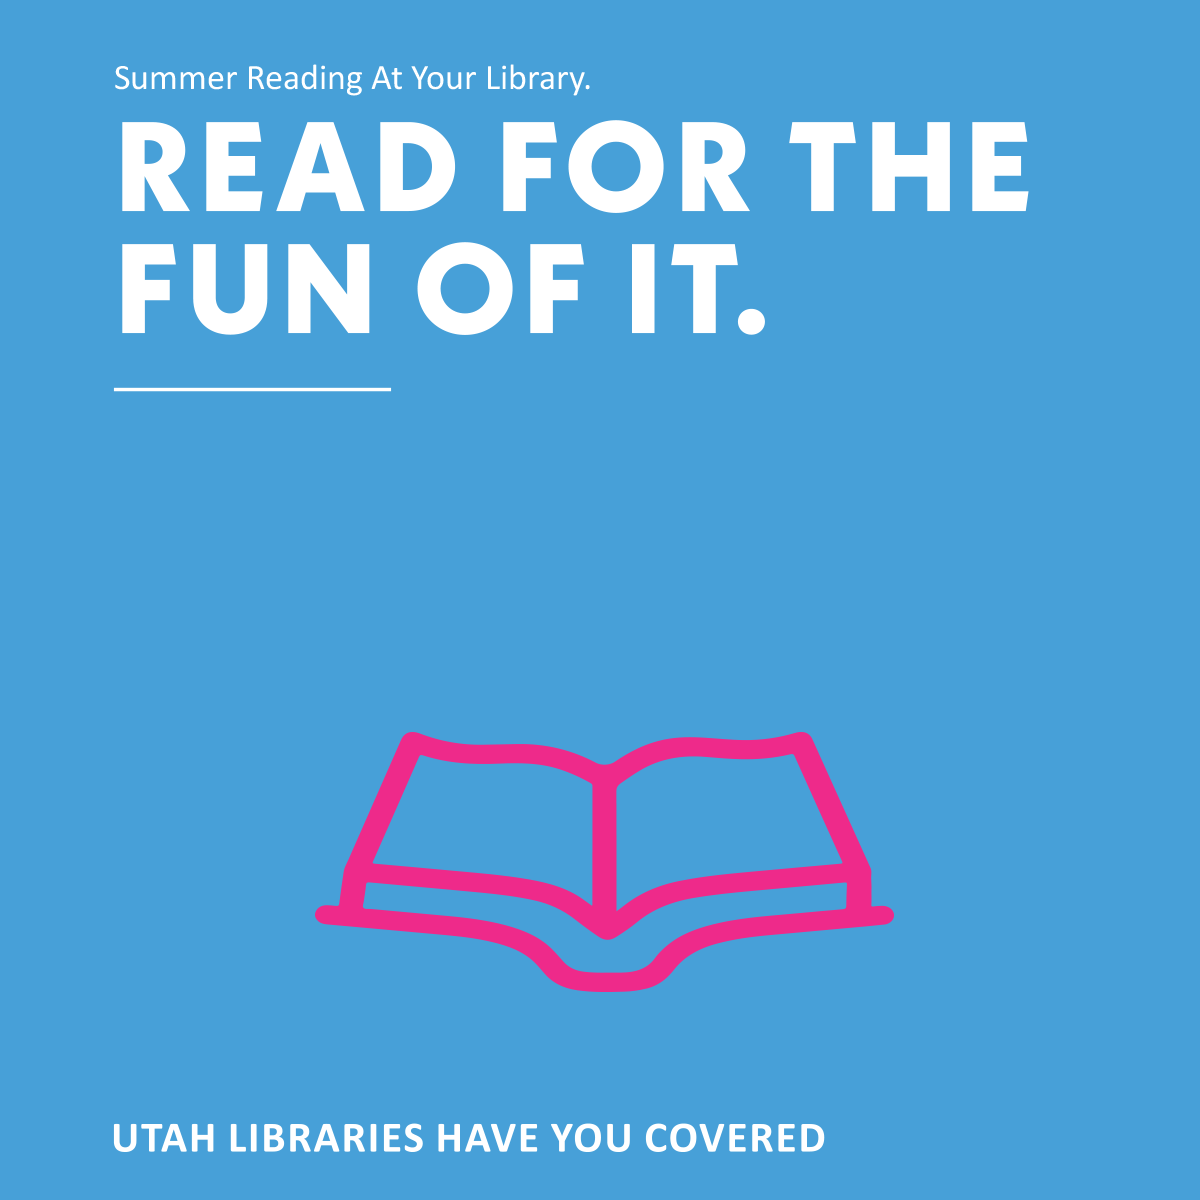 Utah Libraries Have You Covered - Summer Reading